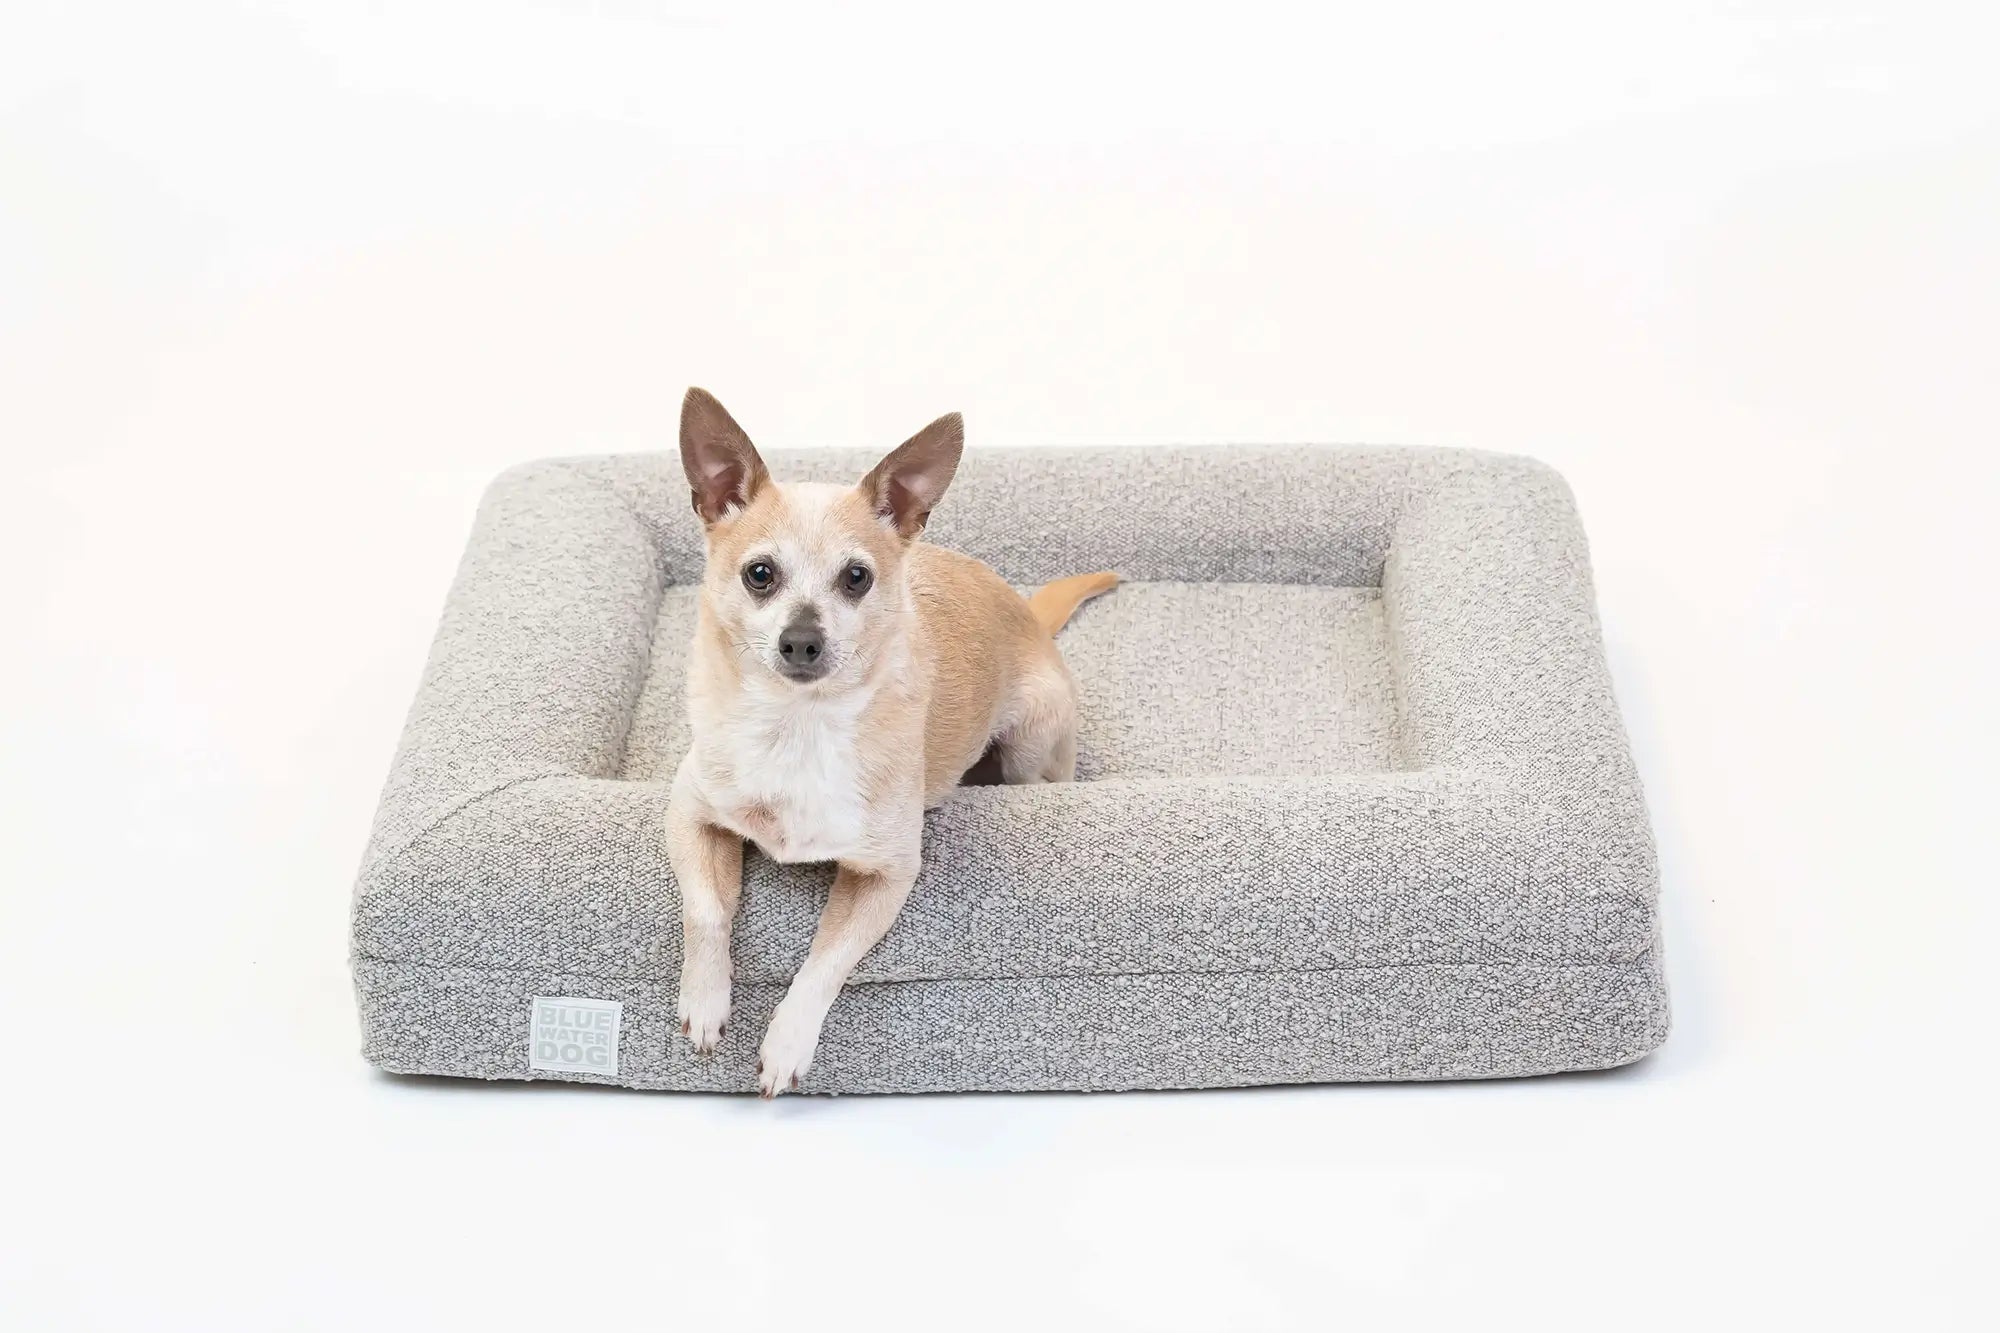 Chihuahua laying on a small, sand-colored orthopedic memory foam boucle dog bed.